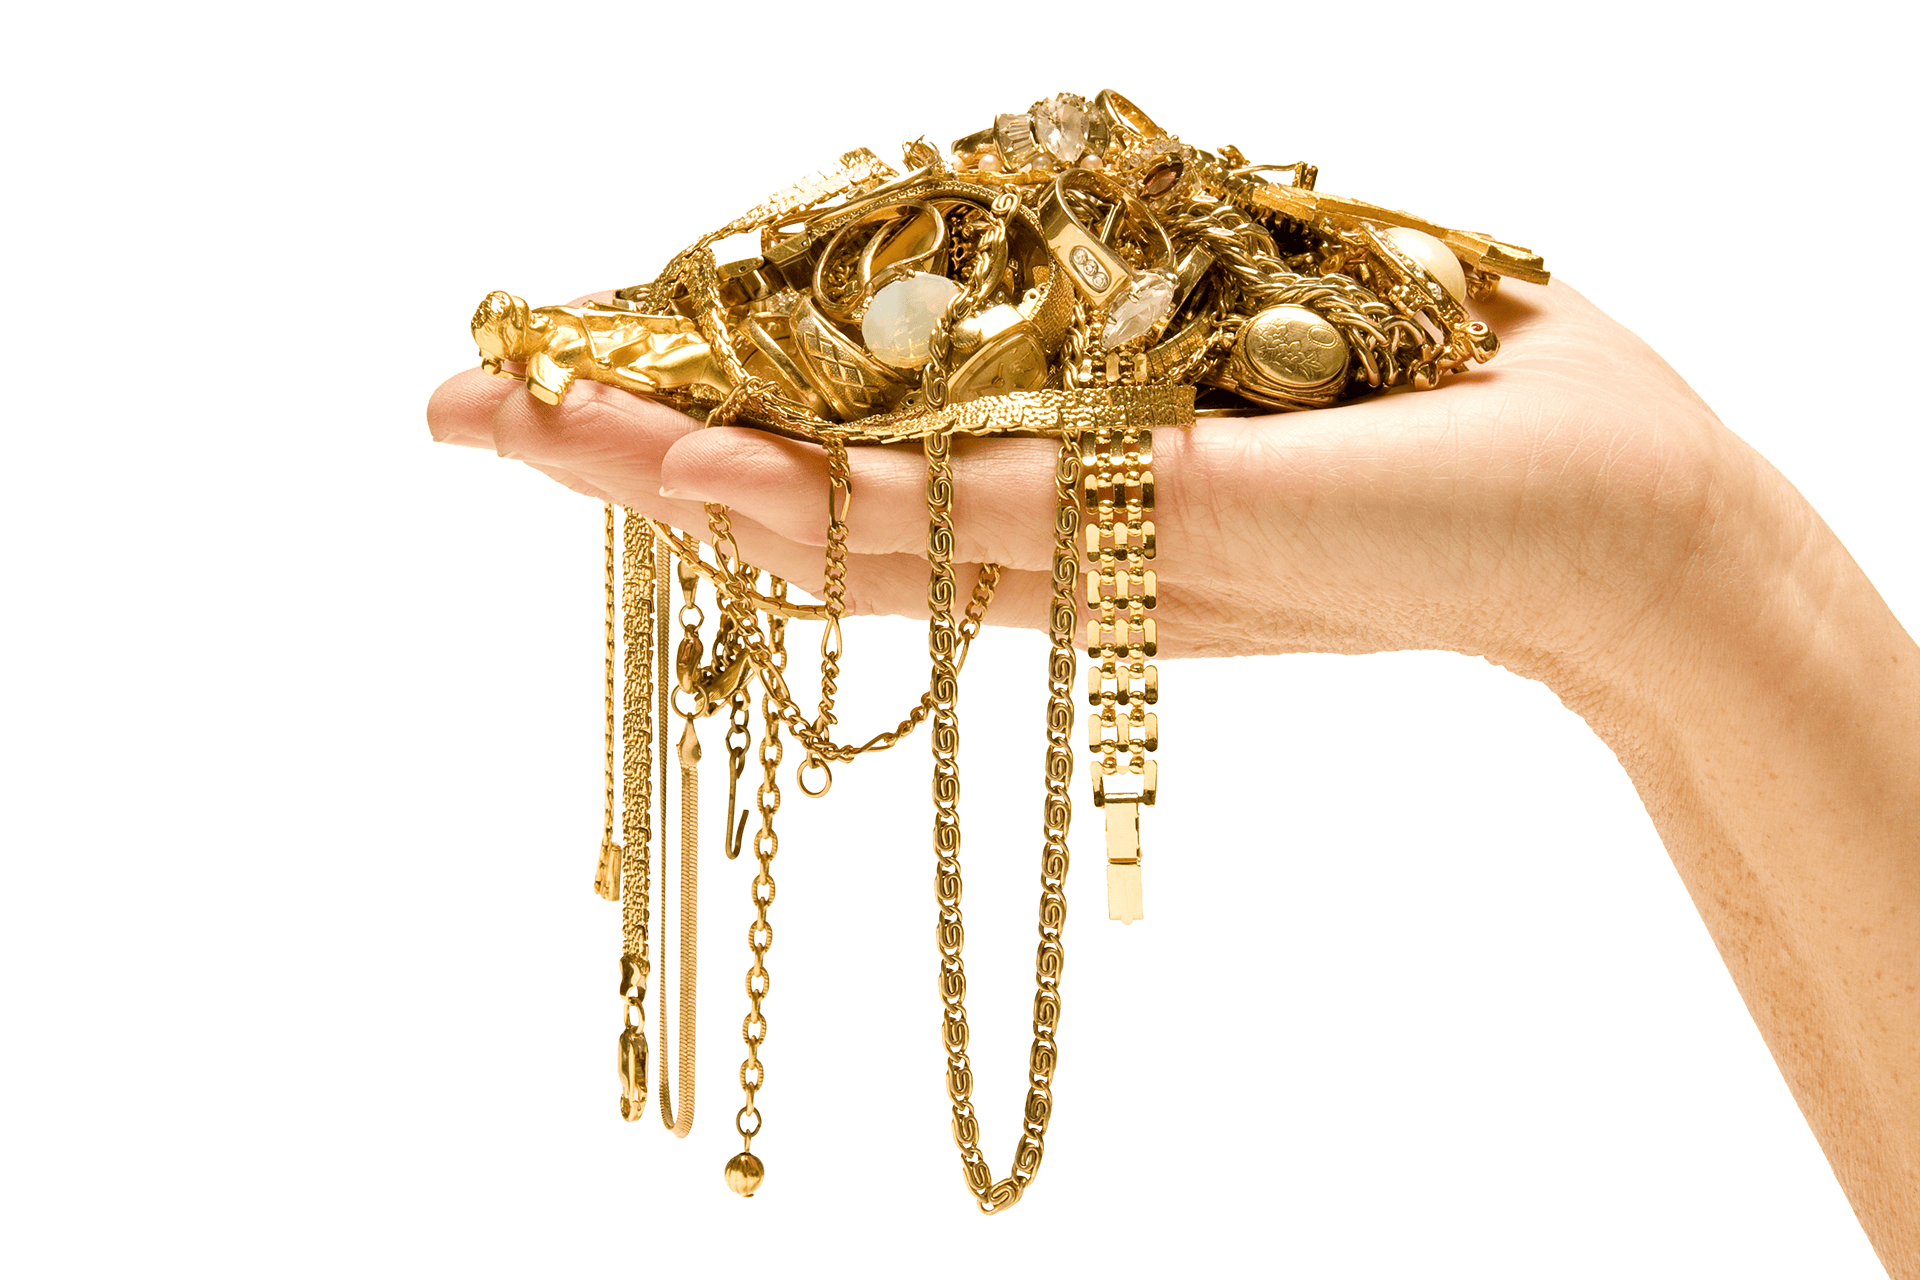 An open hand, palm up, holding a pile of gold bracelets, necklaces and rings on homepage of King Gold and Pawn in Brooklyn.